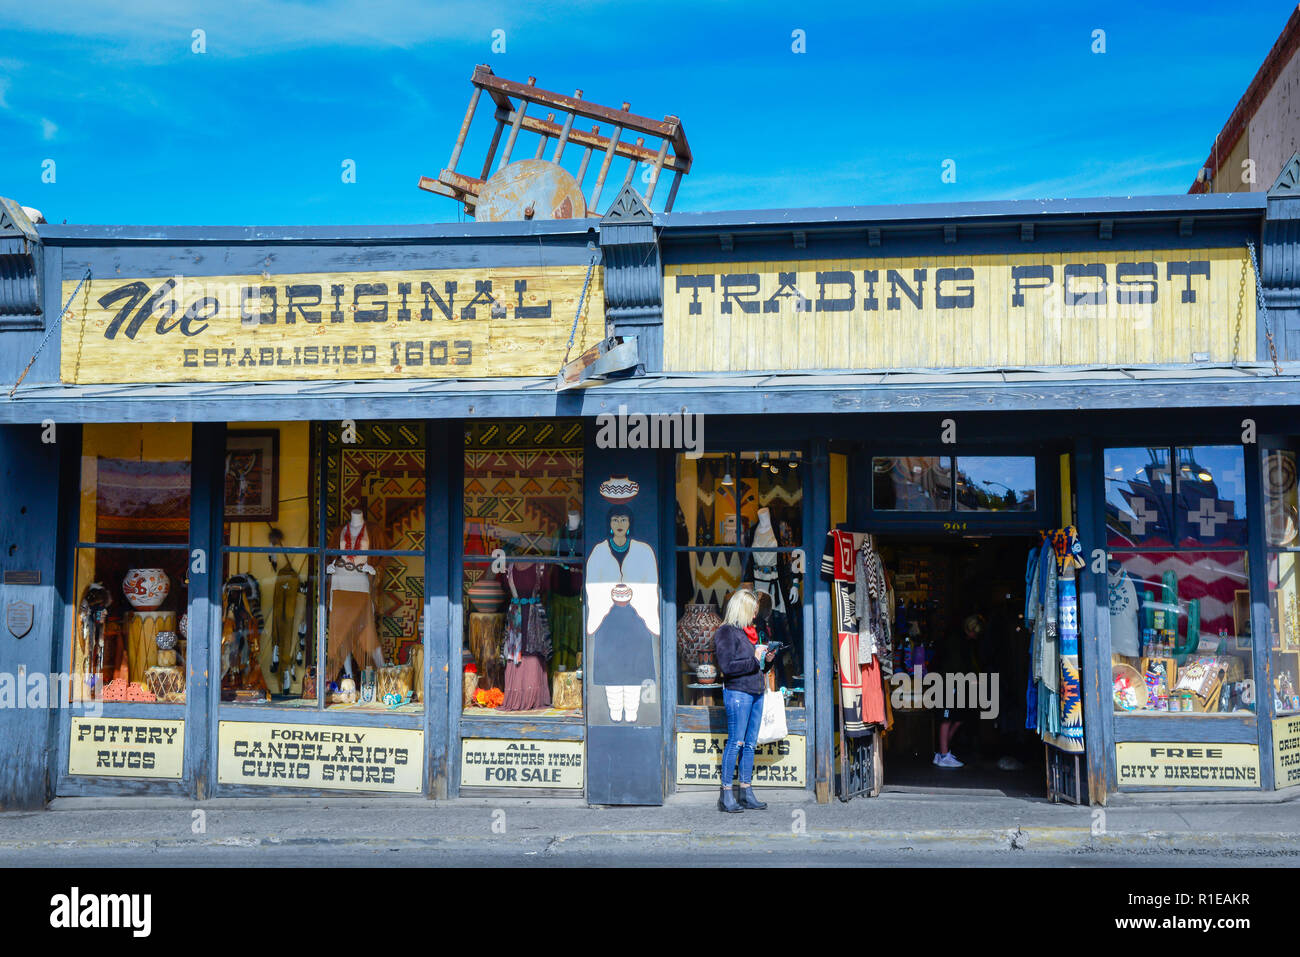 The original trading post store attracts visitors with it's eclectic merchandise and history in downtown Santa Fe, NM,  USA Stock Photo